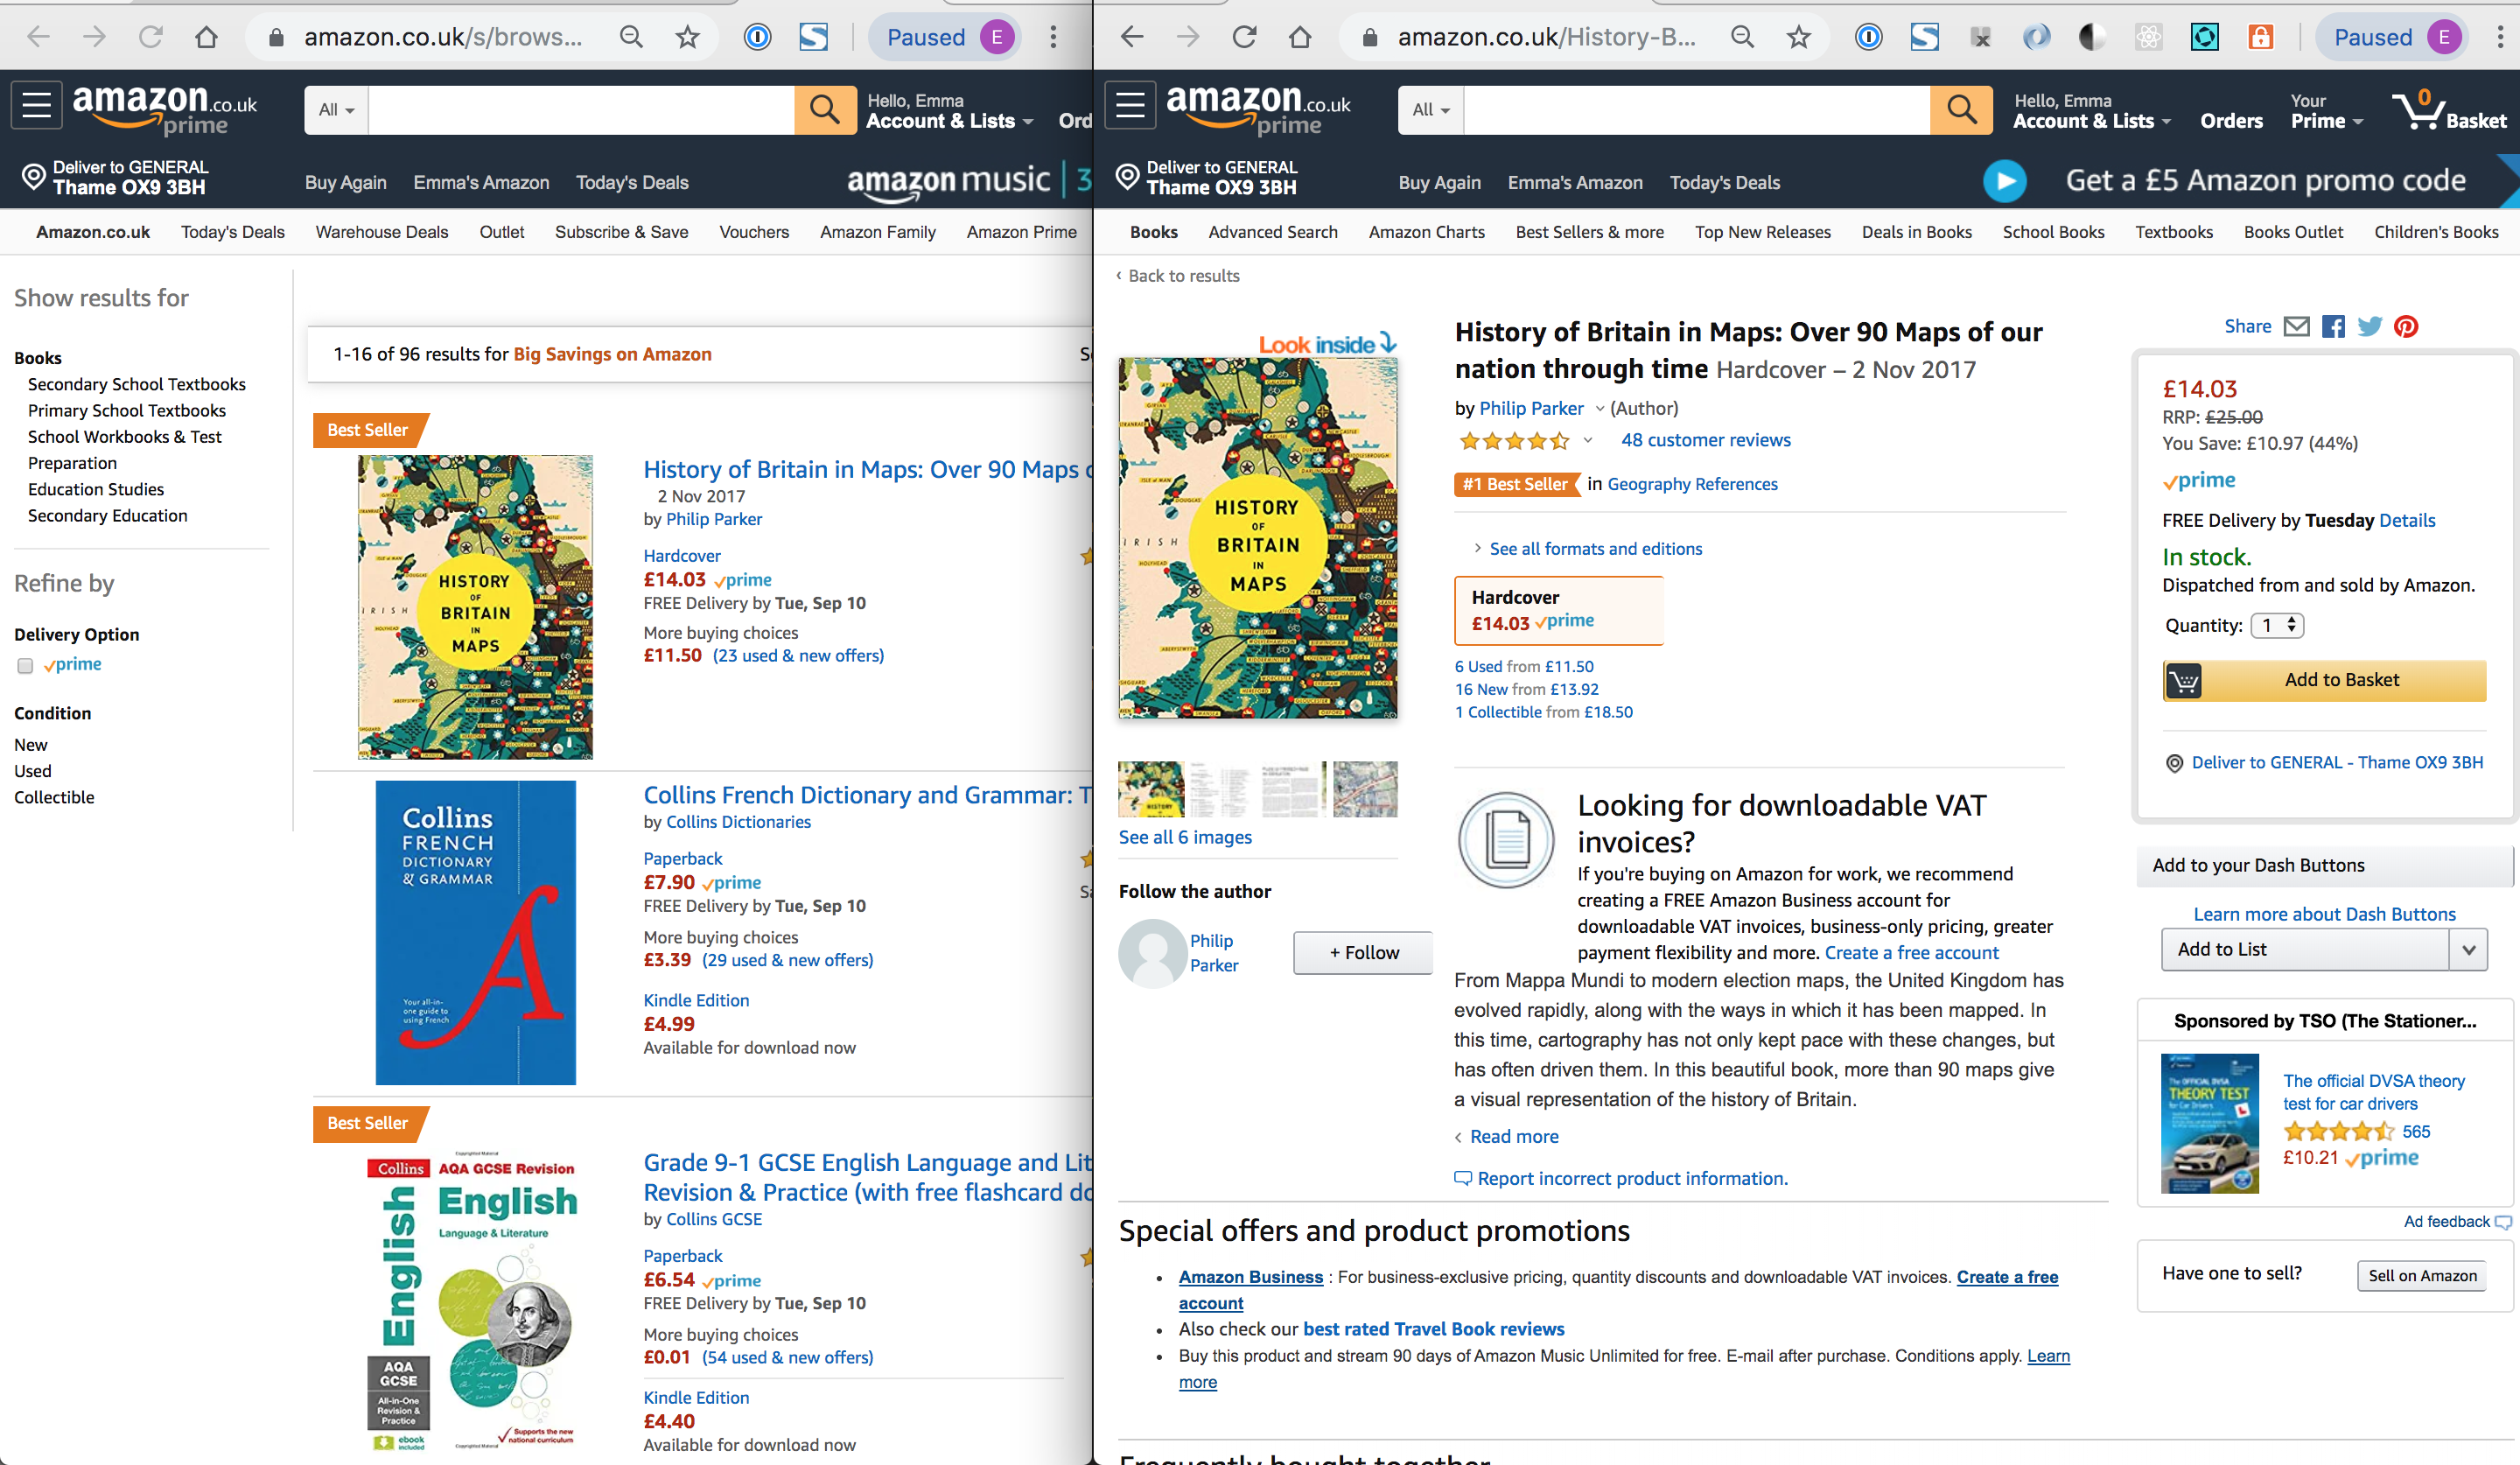 Screenshots of Amazon pages